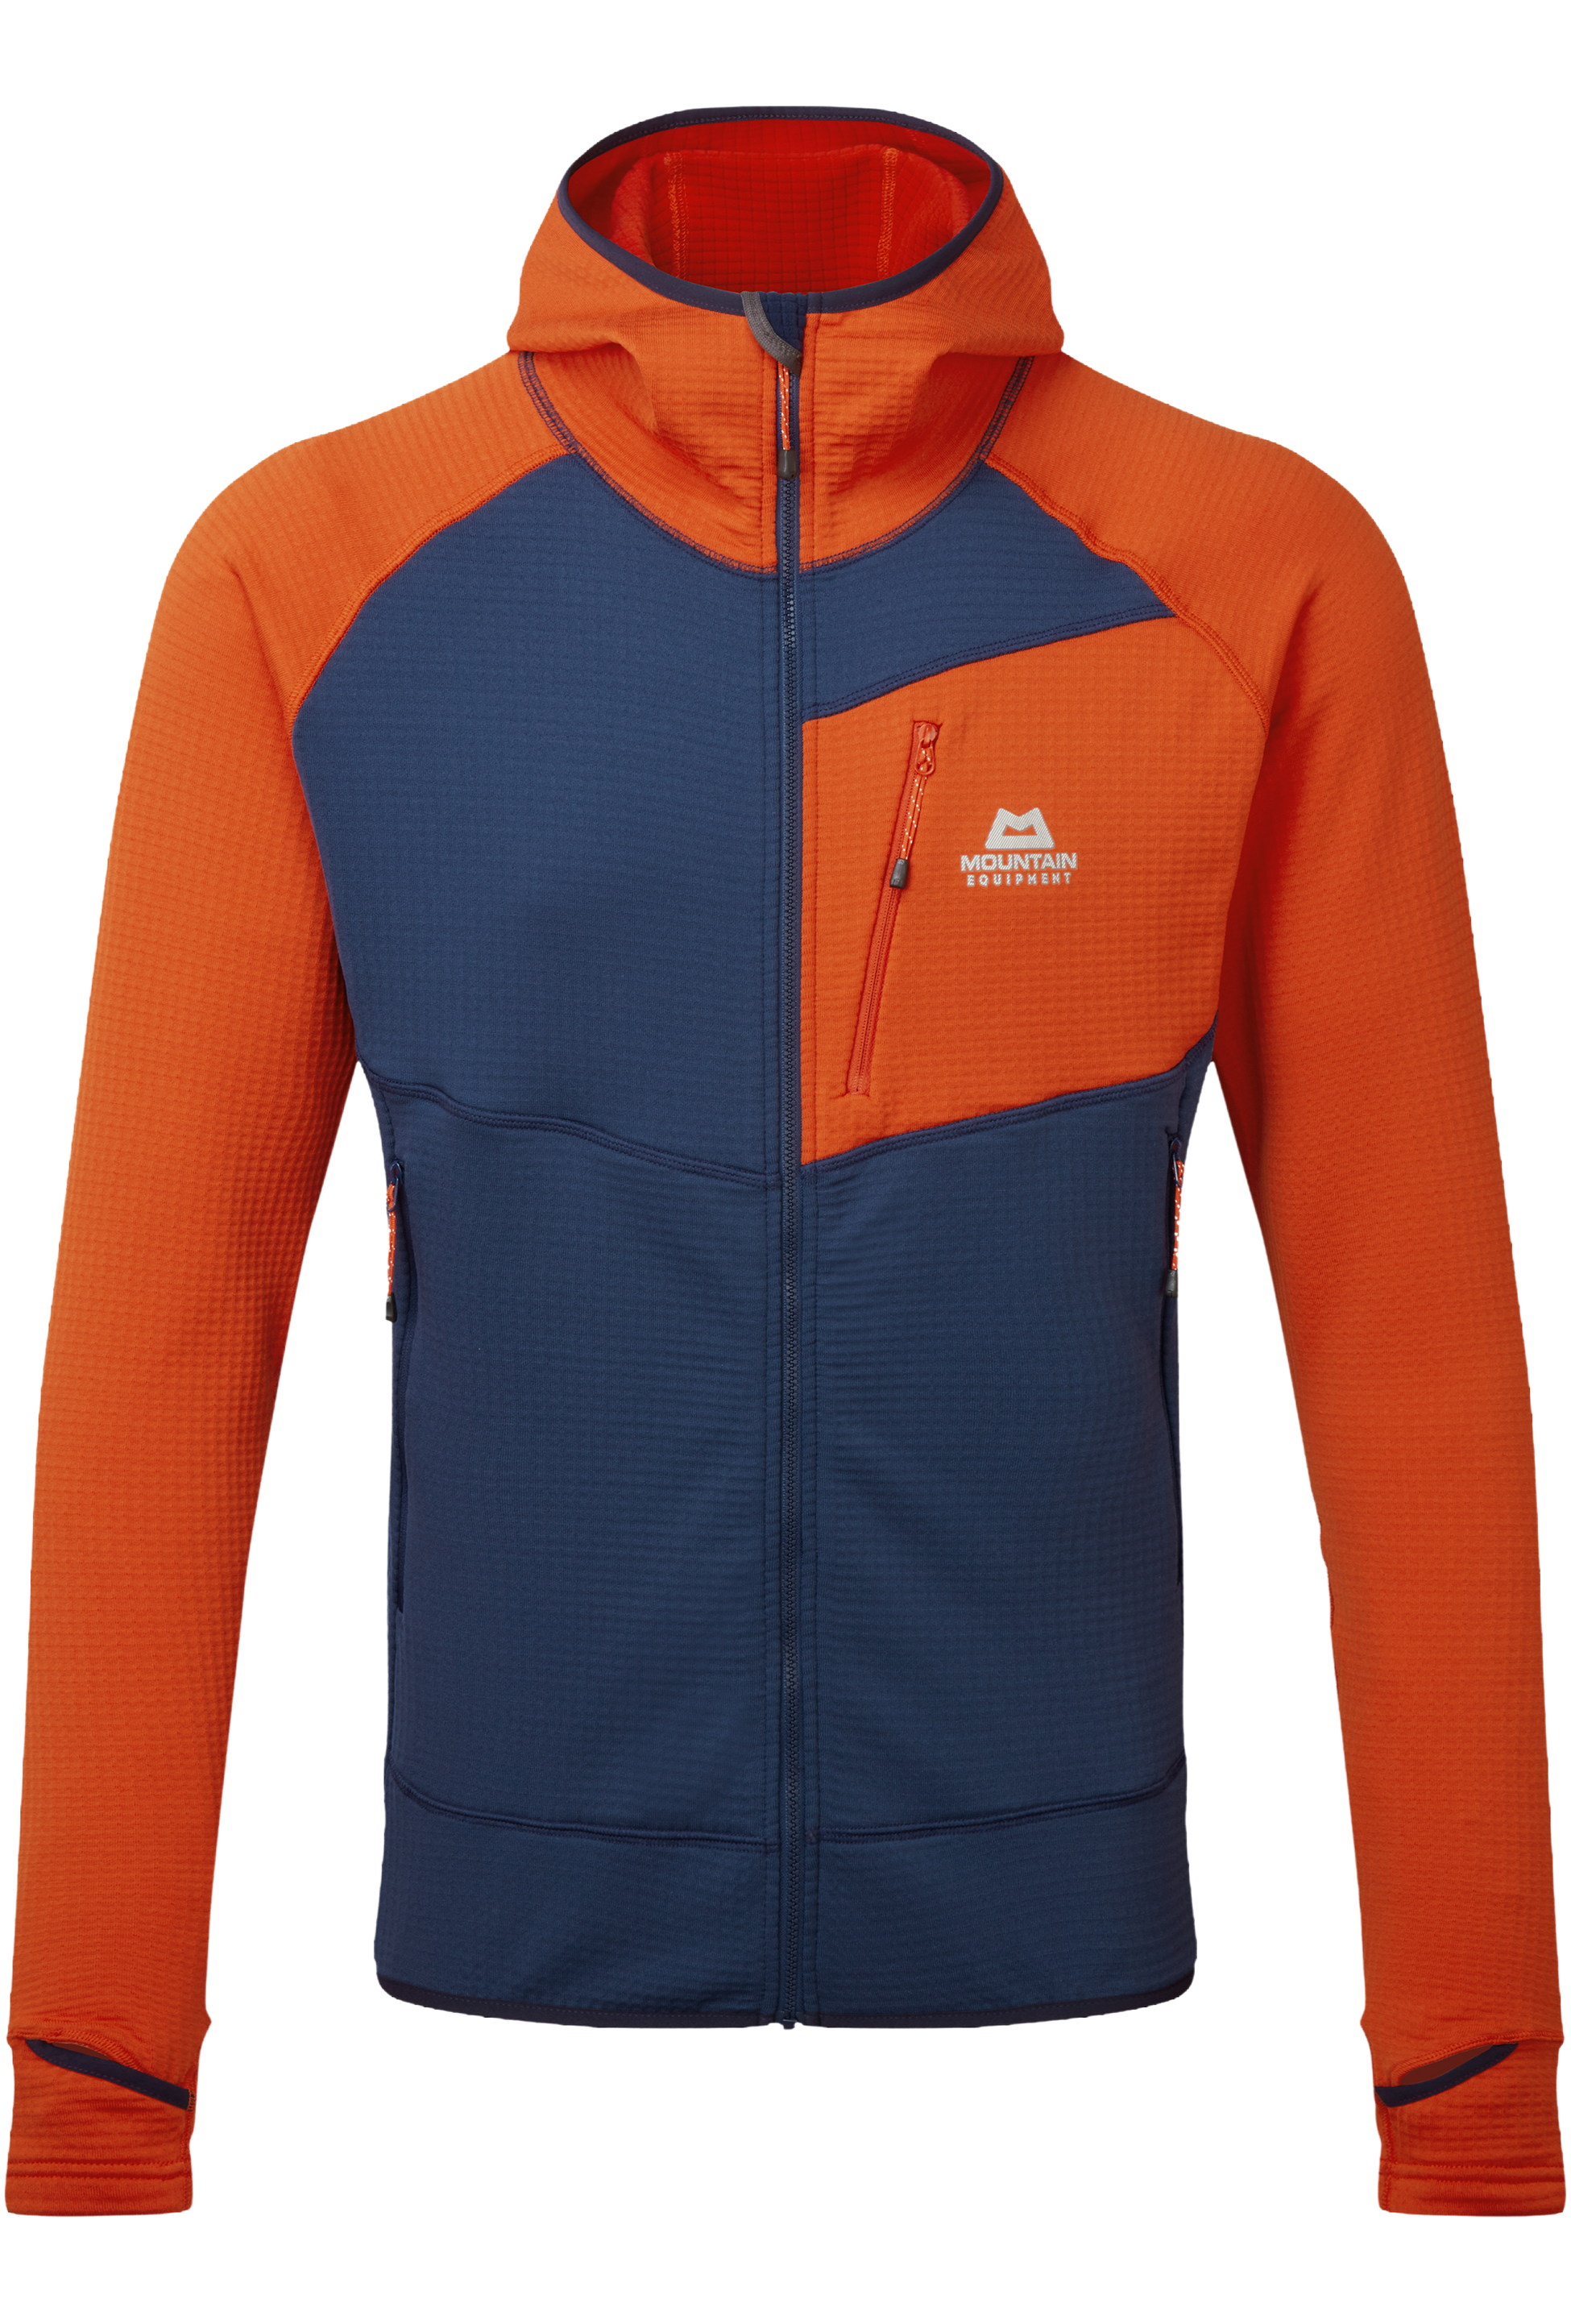 Mountain Equipment Eclipse Hooded Men's Jacket | Mountain Equipment | Portwest - The Outdoor Shop